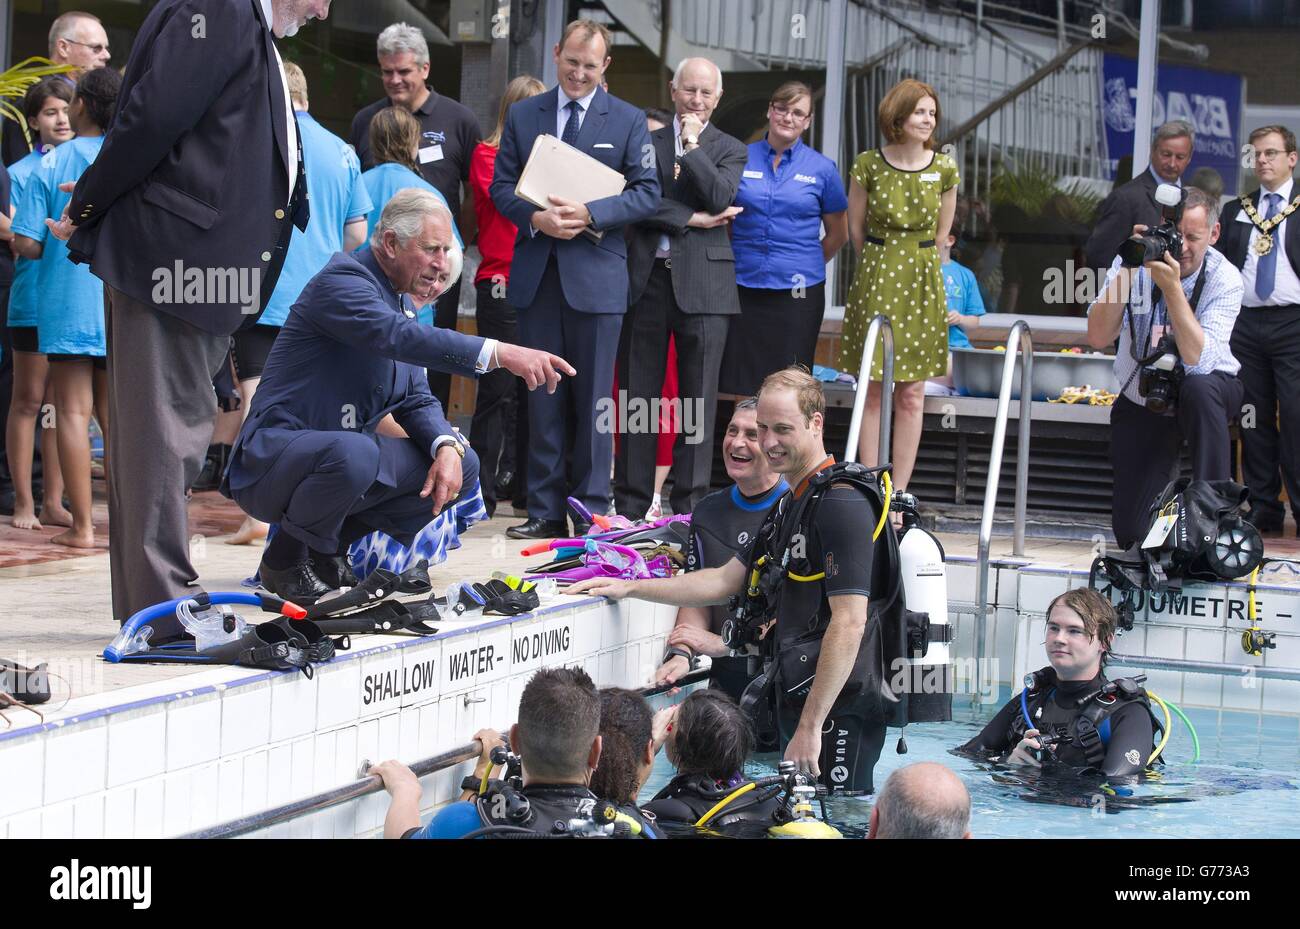 The Prince of Wales speaks with the Duke of Cambrige, as he scuba dives with British Sub-Aqua Club (BSAC) members at a swimming pool in London. Stock Photo